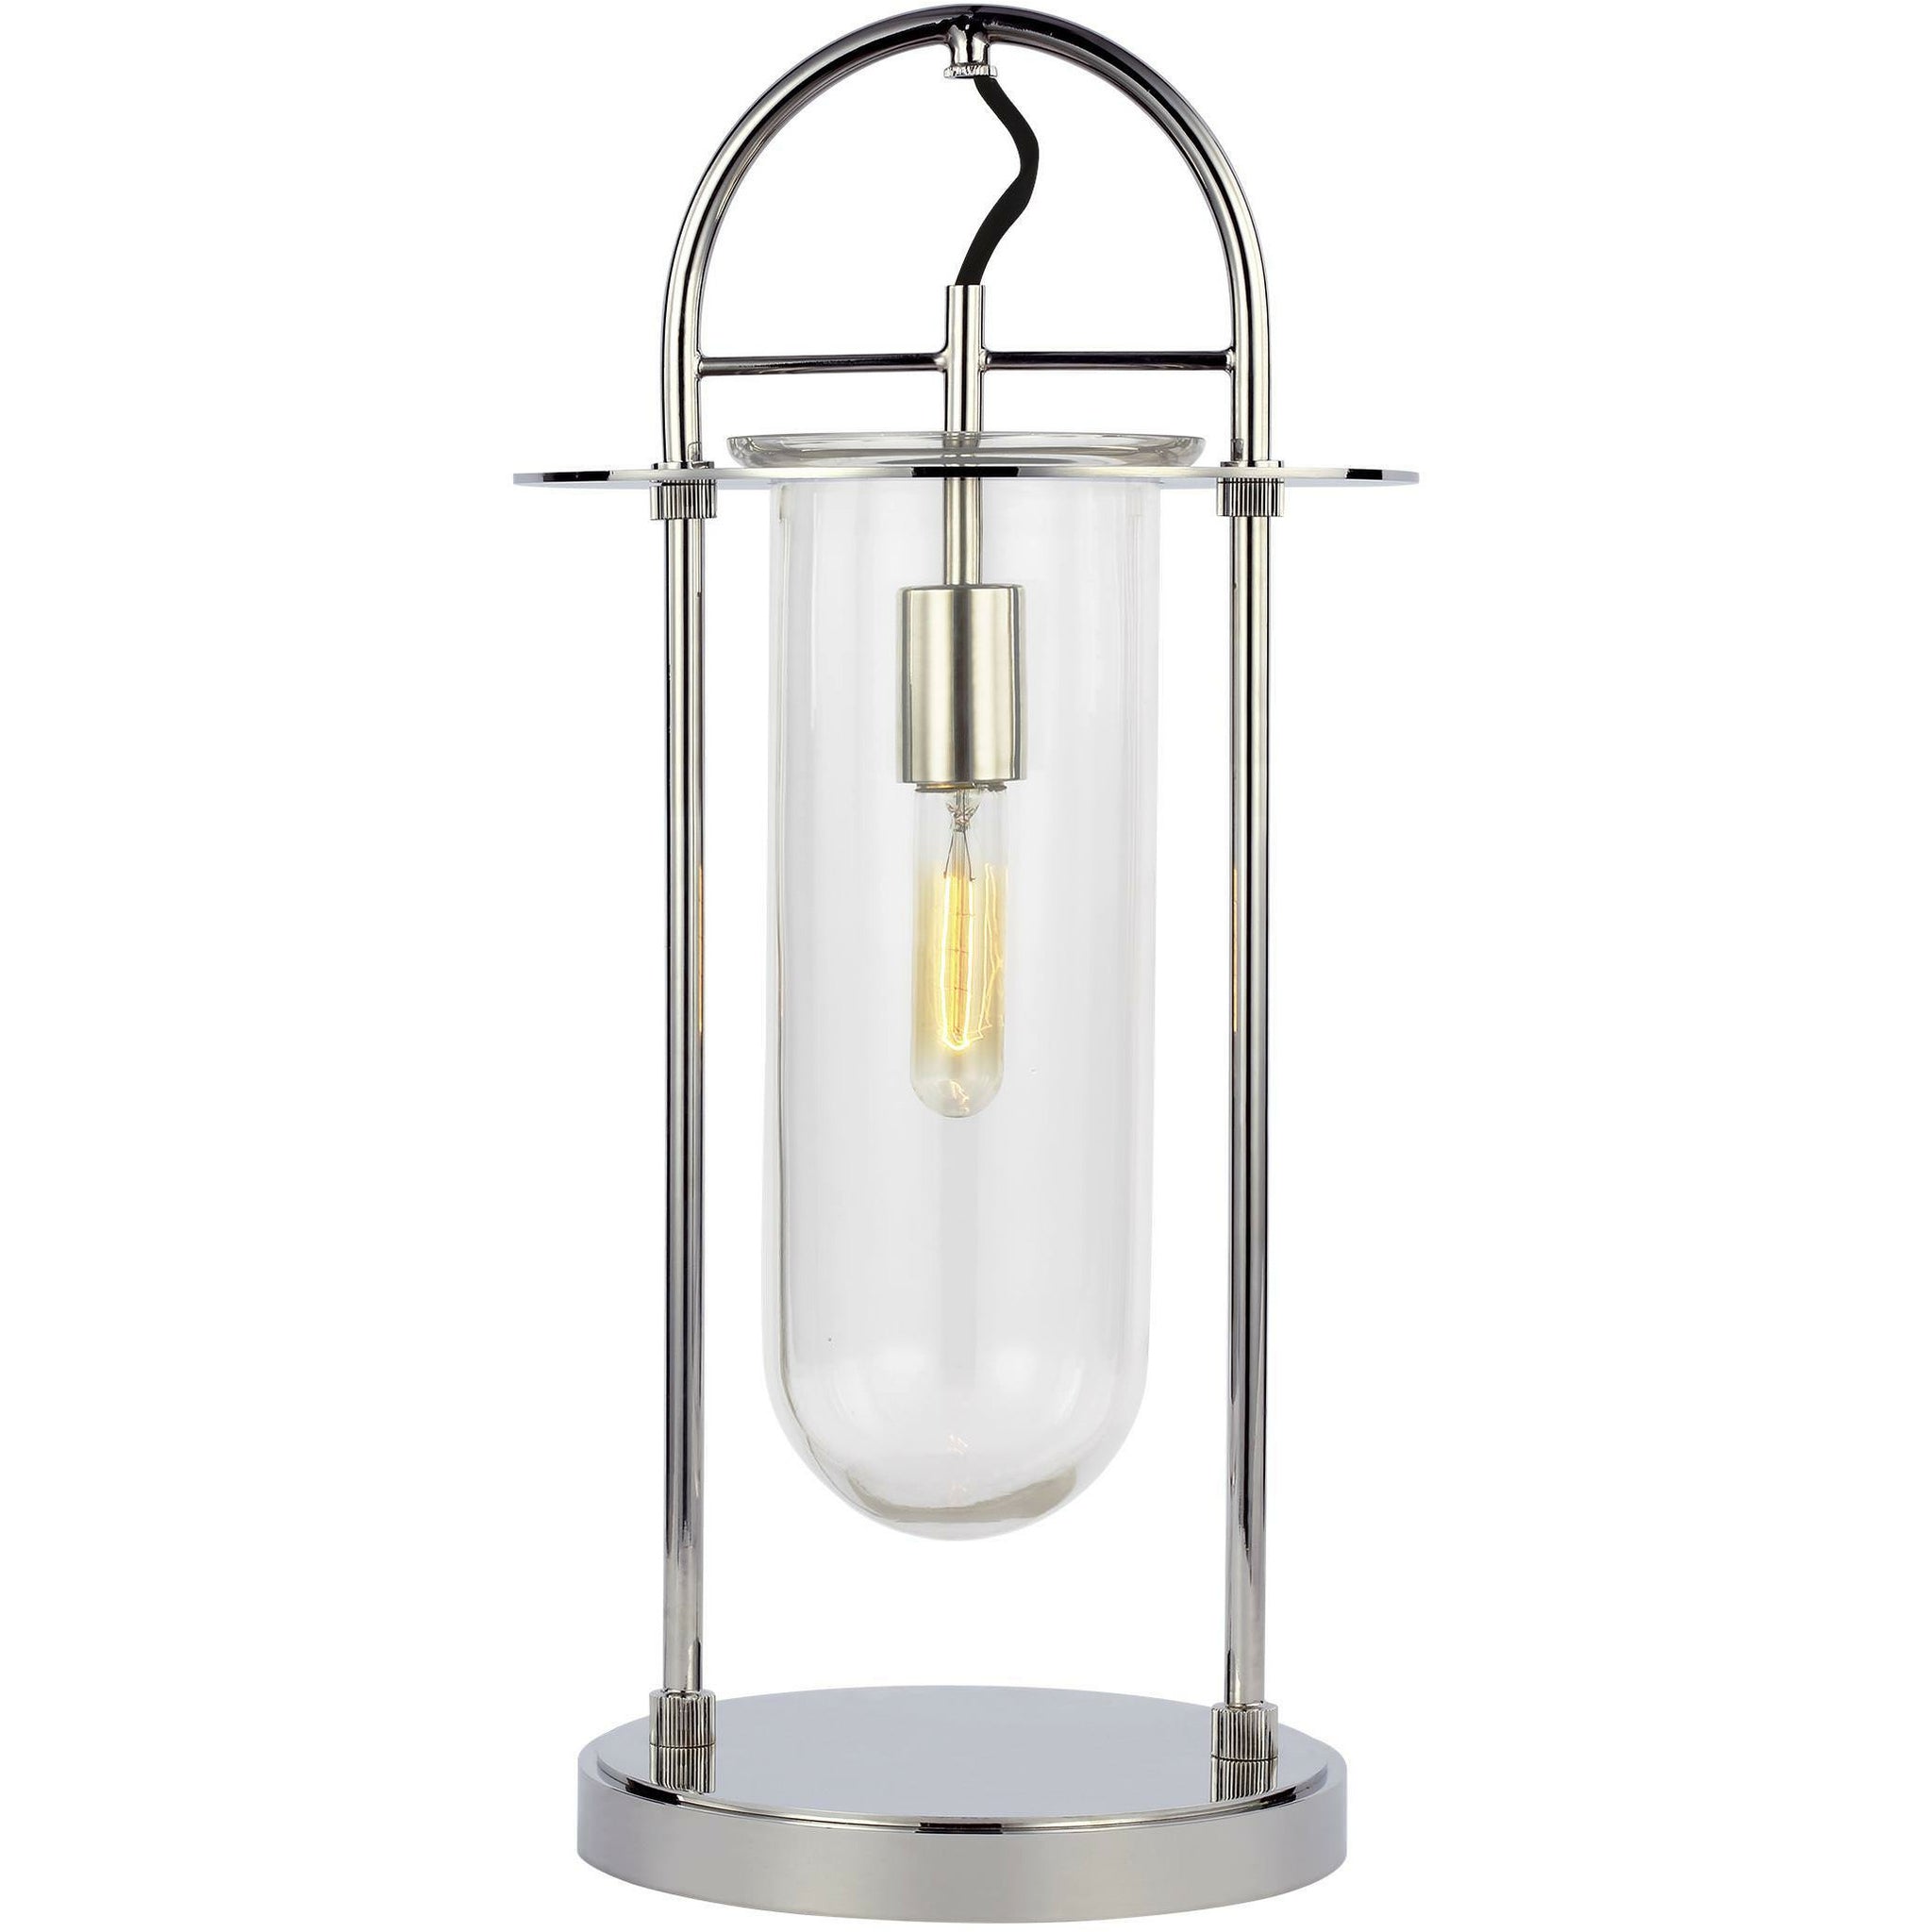 Nuance Table Lamp Polished Nickel